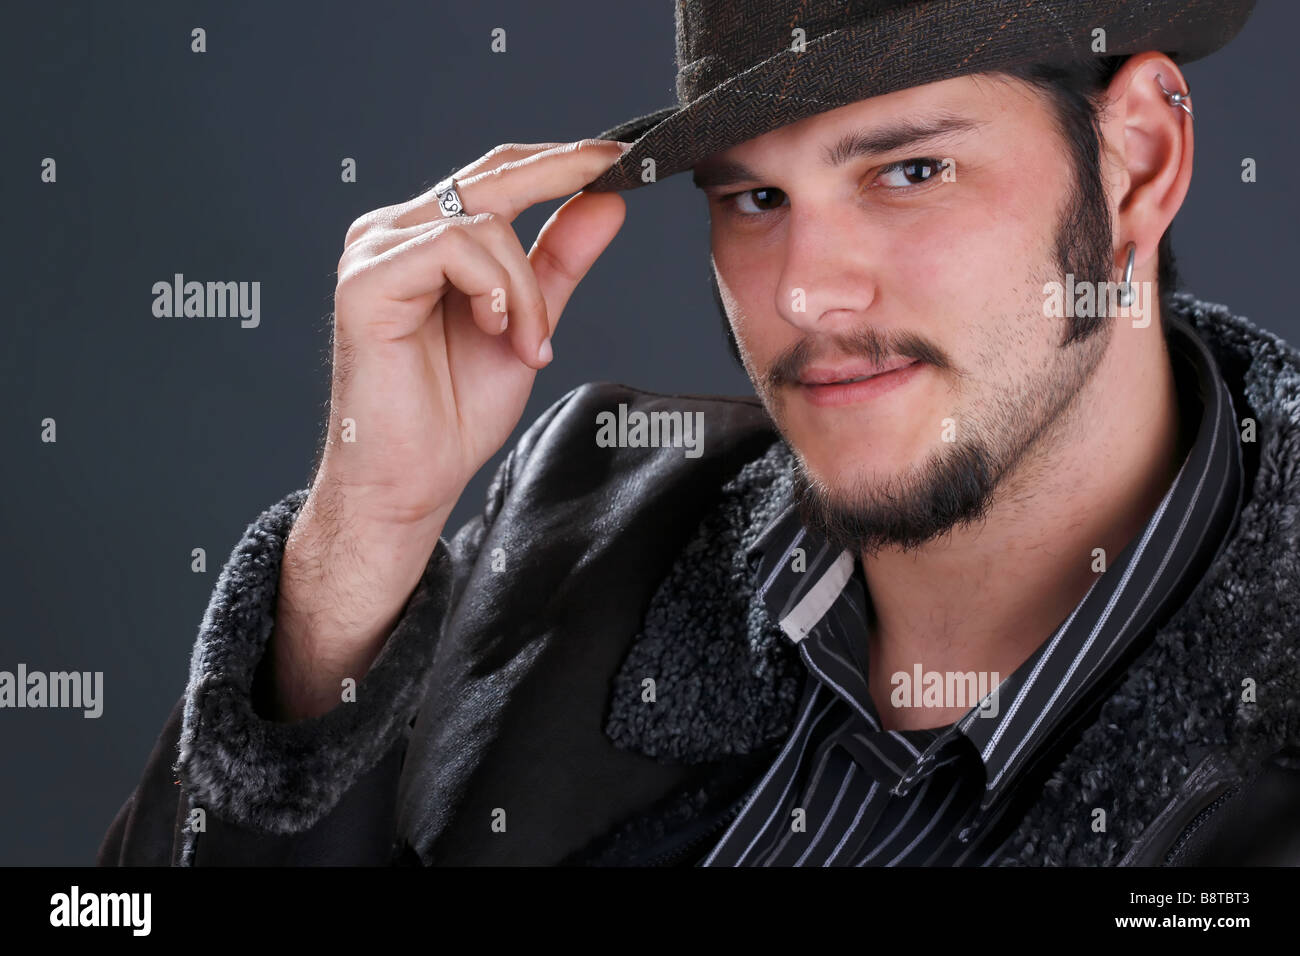 Man with hat Stock Photo